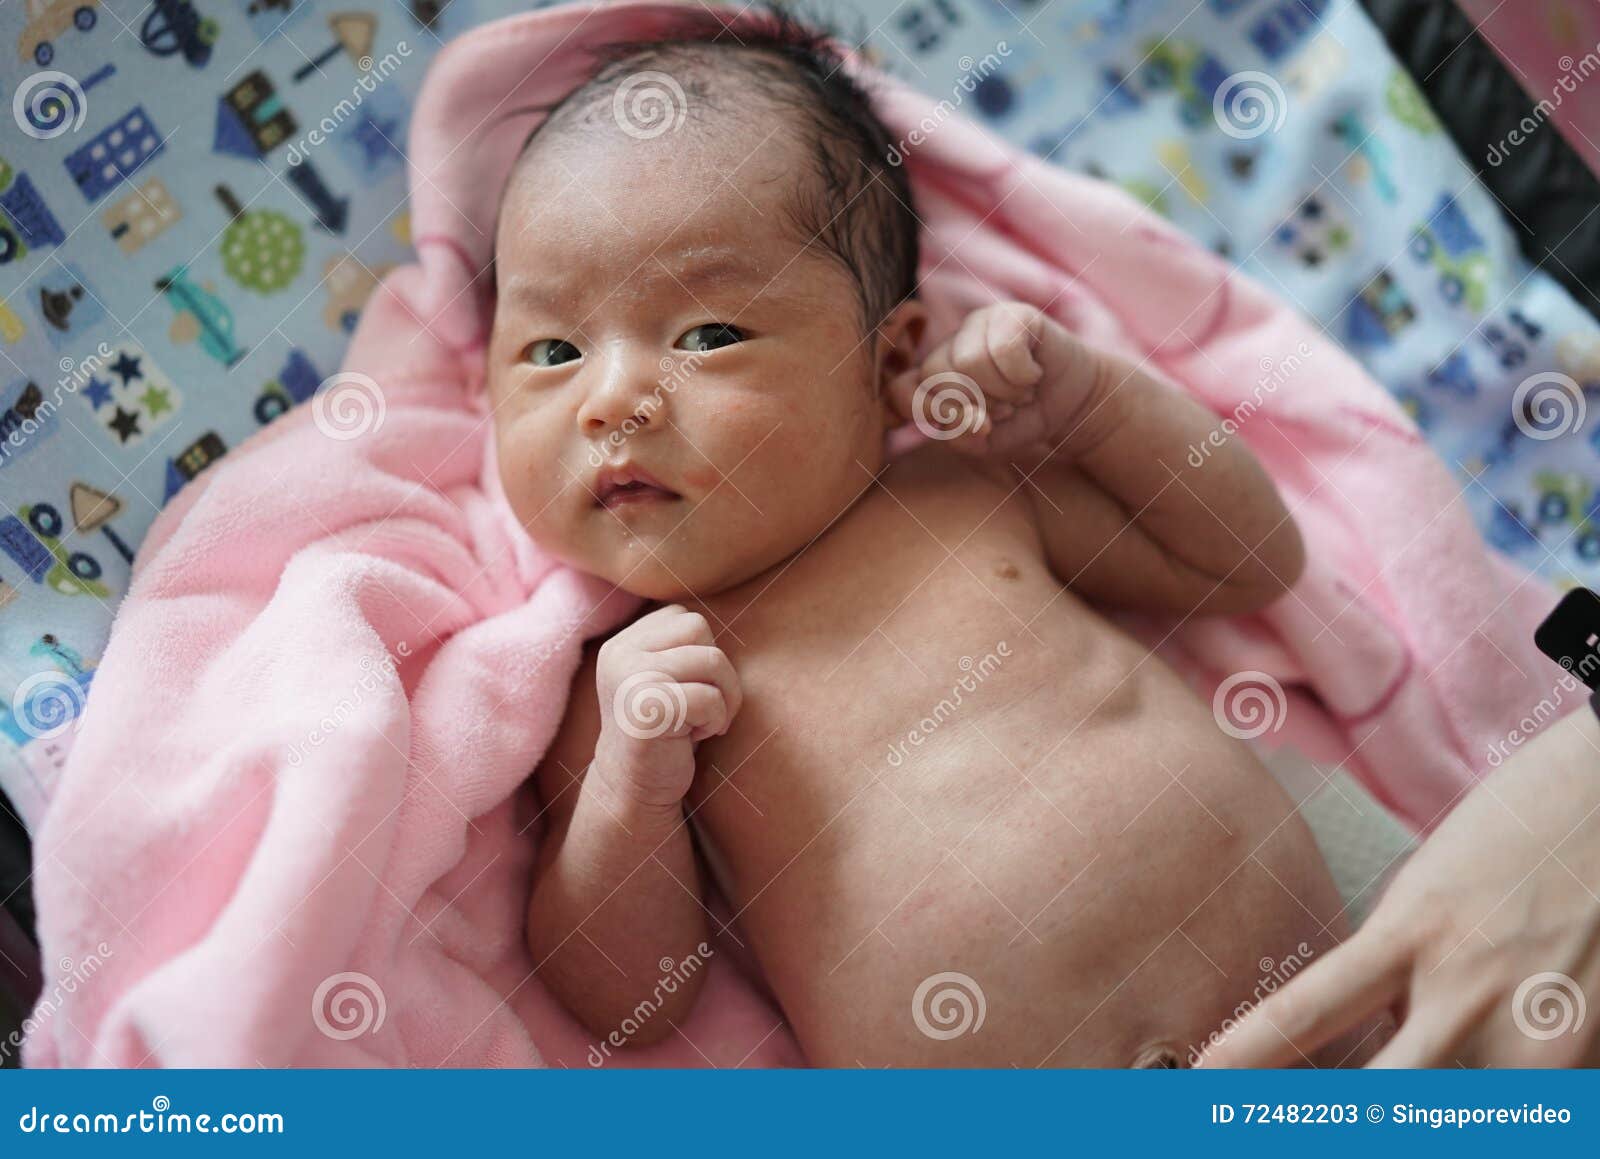 New Born Asian Chinese Baby after Shower Stock Image - Image of fear,  infant: 72482203